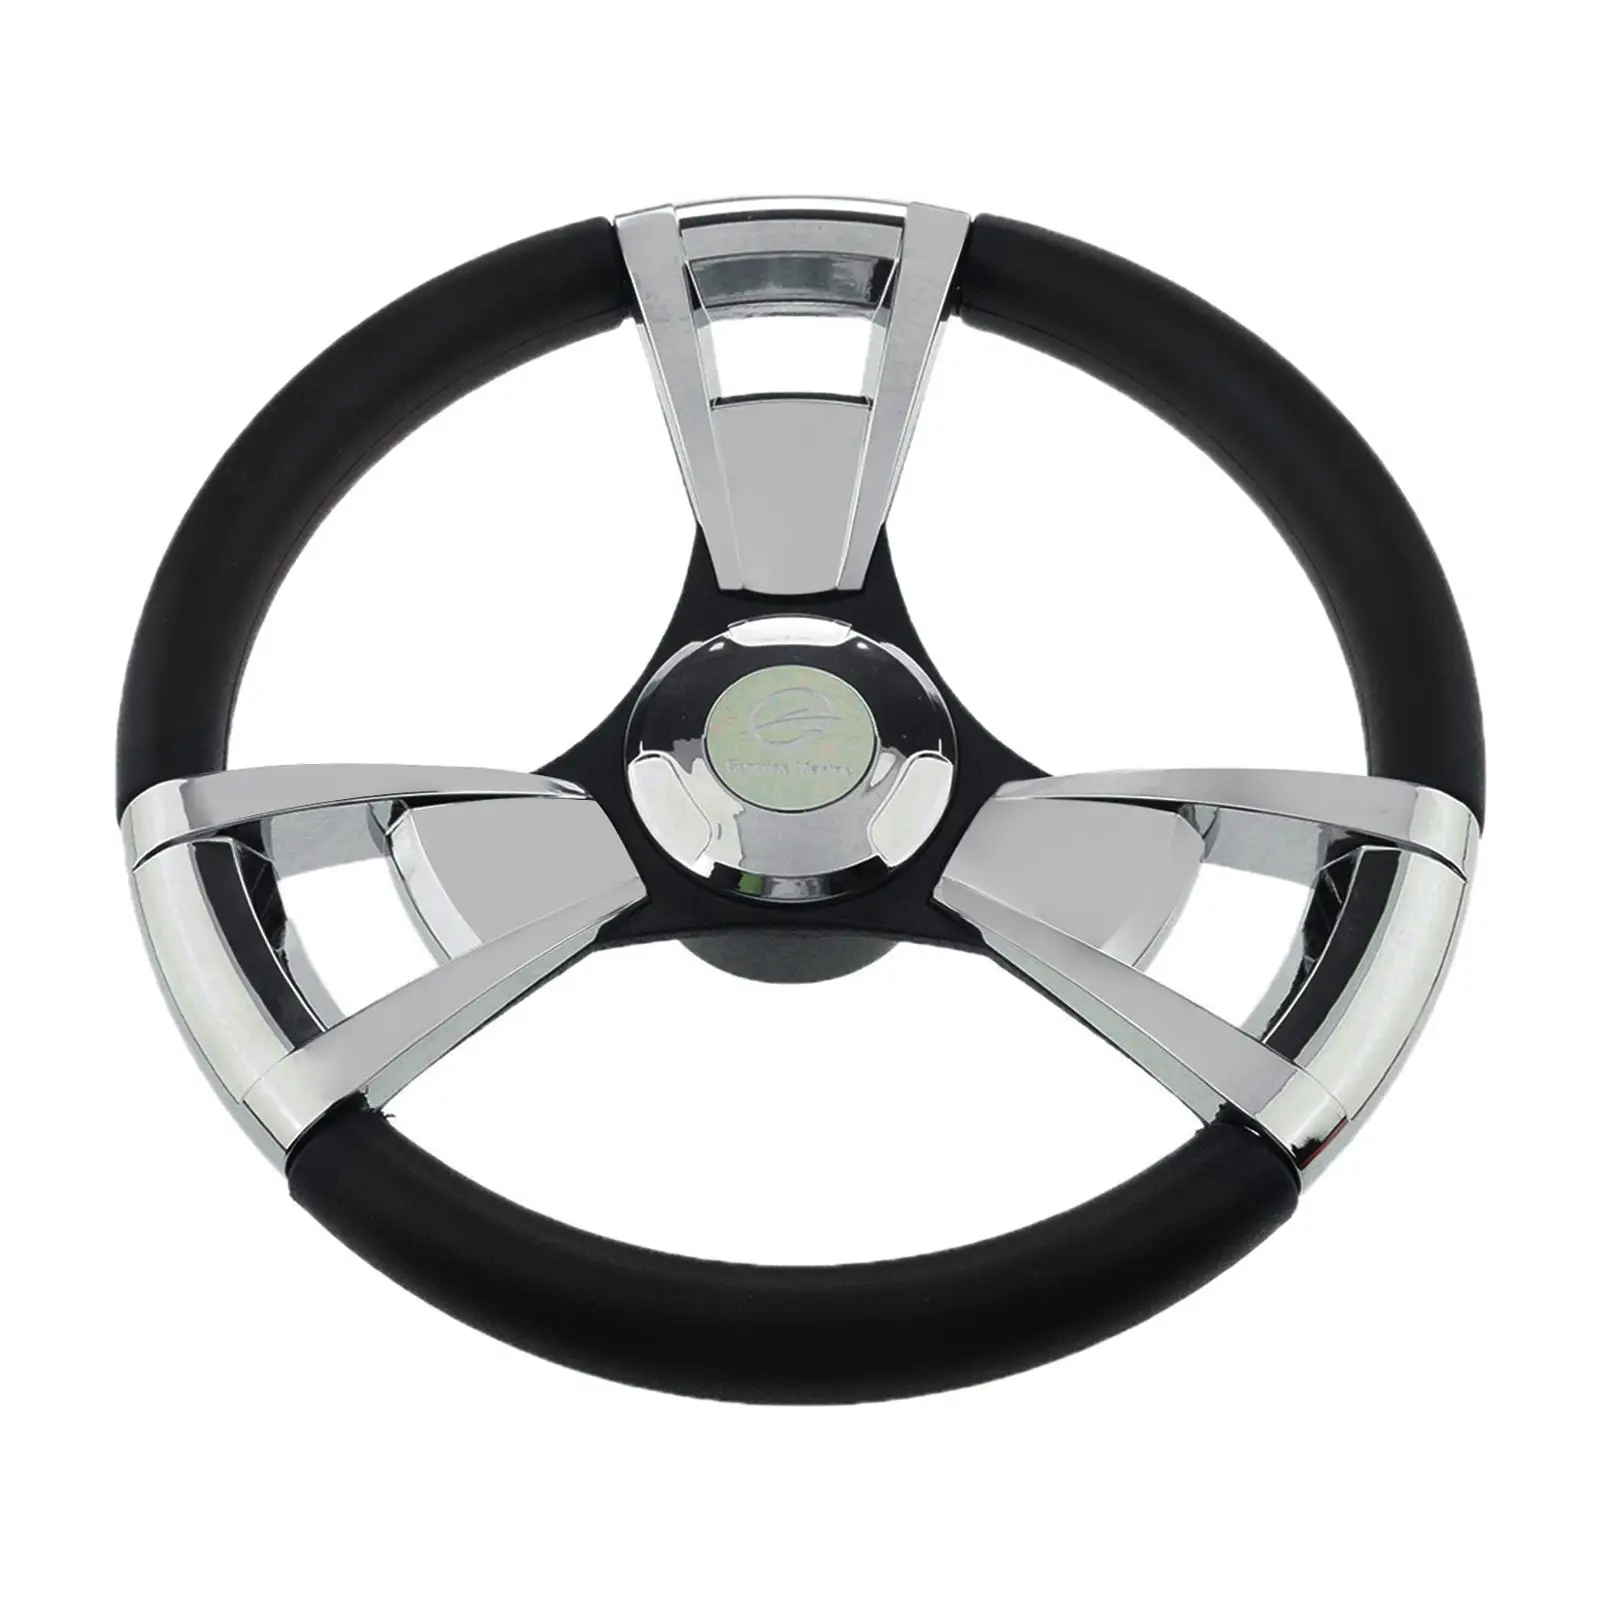 380mm Wooden Steering Wheel fit for Classic Cars, Made of Steel and Wood